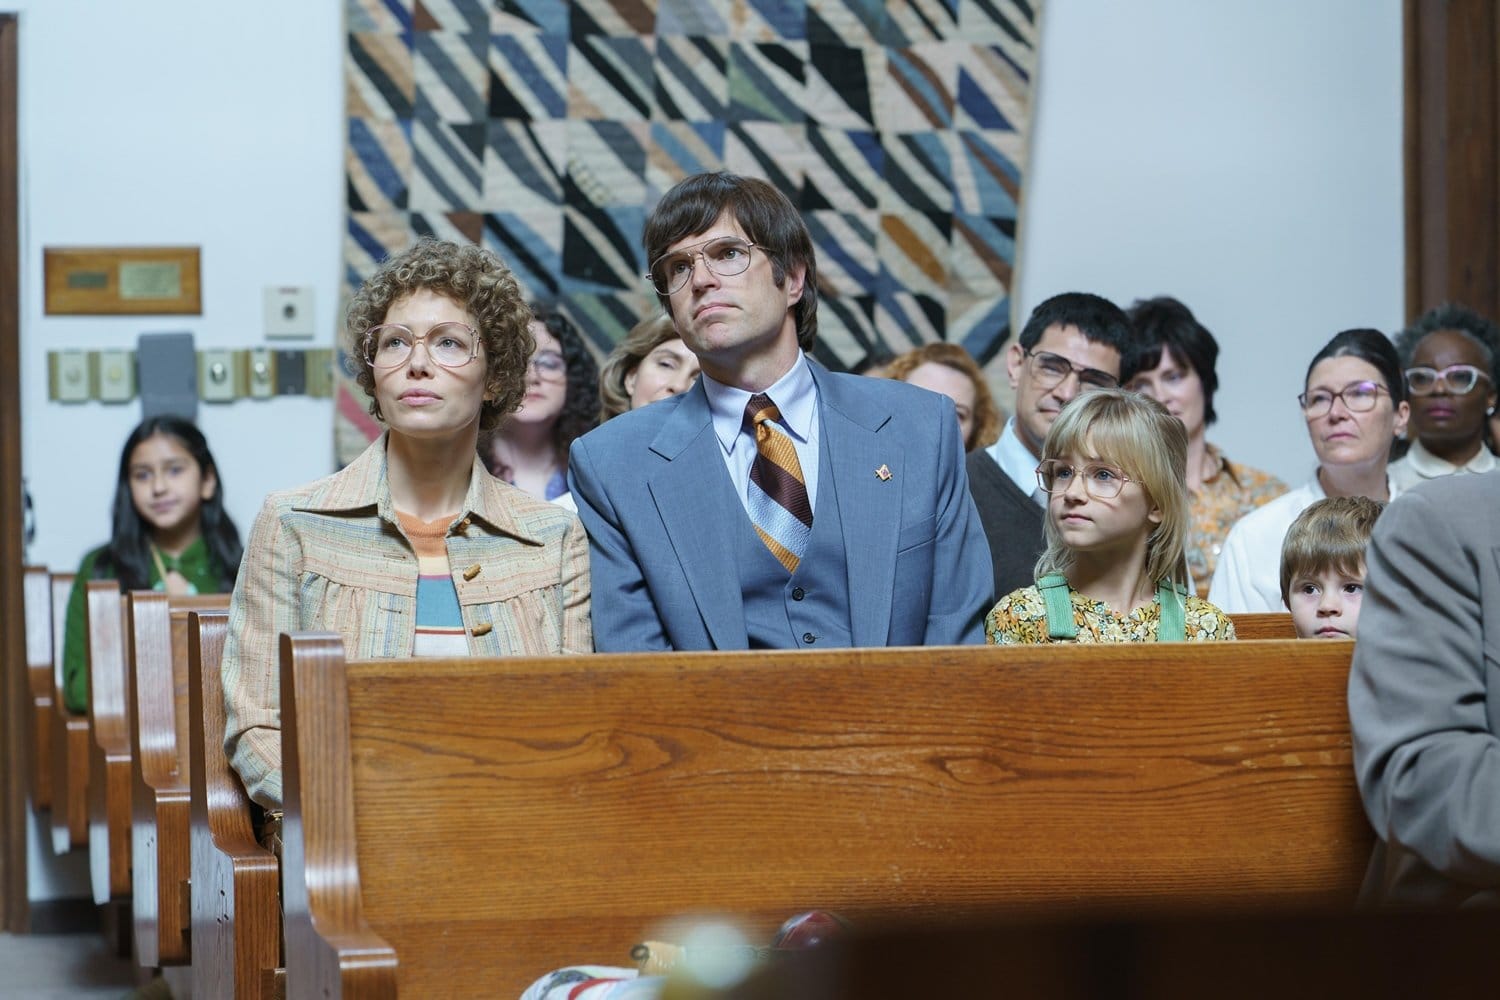 Jessica Biel as the real-life Candy Montgomery, Timothy Simons as Pat Montgomery, Aven Lotz as Becky Montgomery, and Dash McCloud as Jason Montgomery in the American crime drama streaming television miniseries Candy